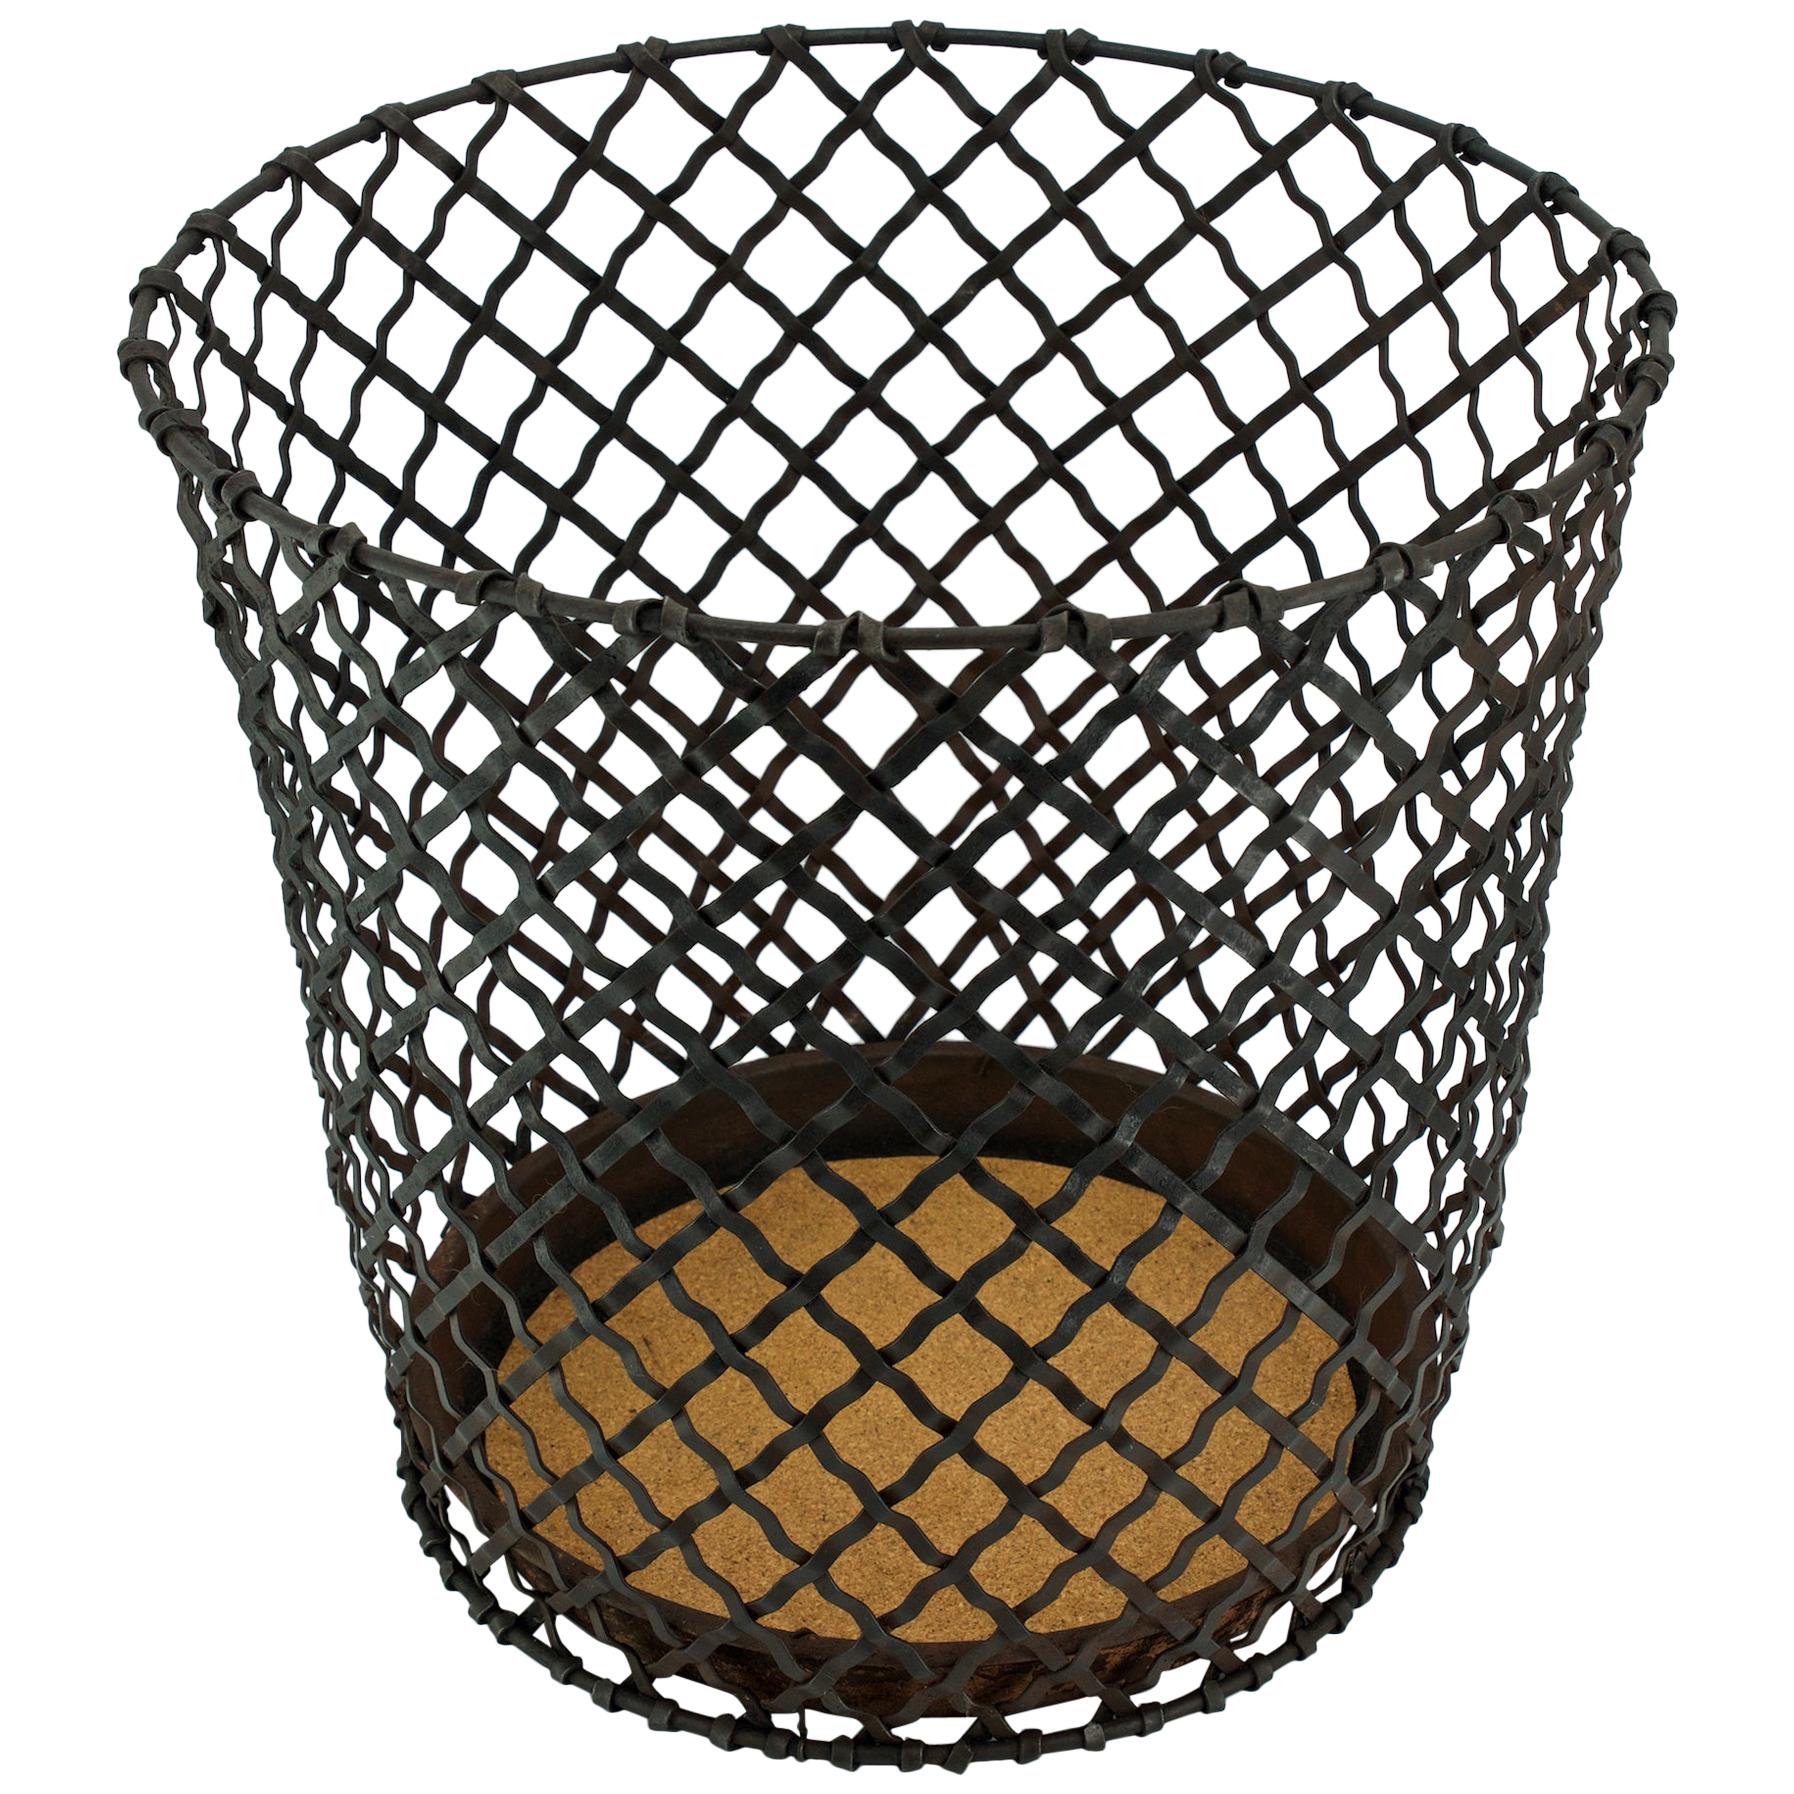 1920s Wastebasket Factory Office Lattice Wire Trash Can Vintage Industrial